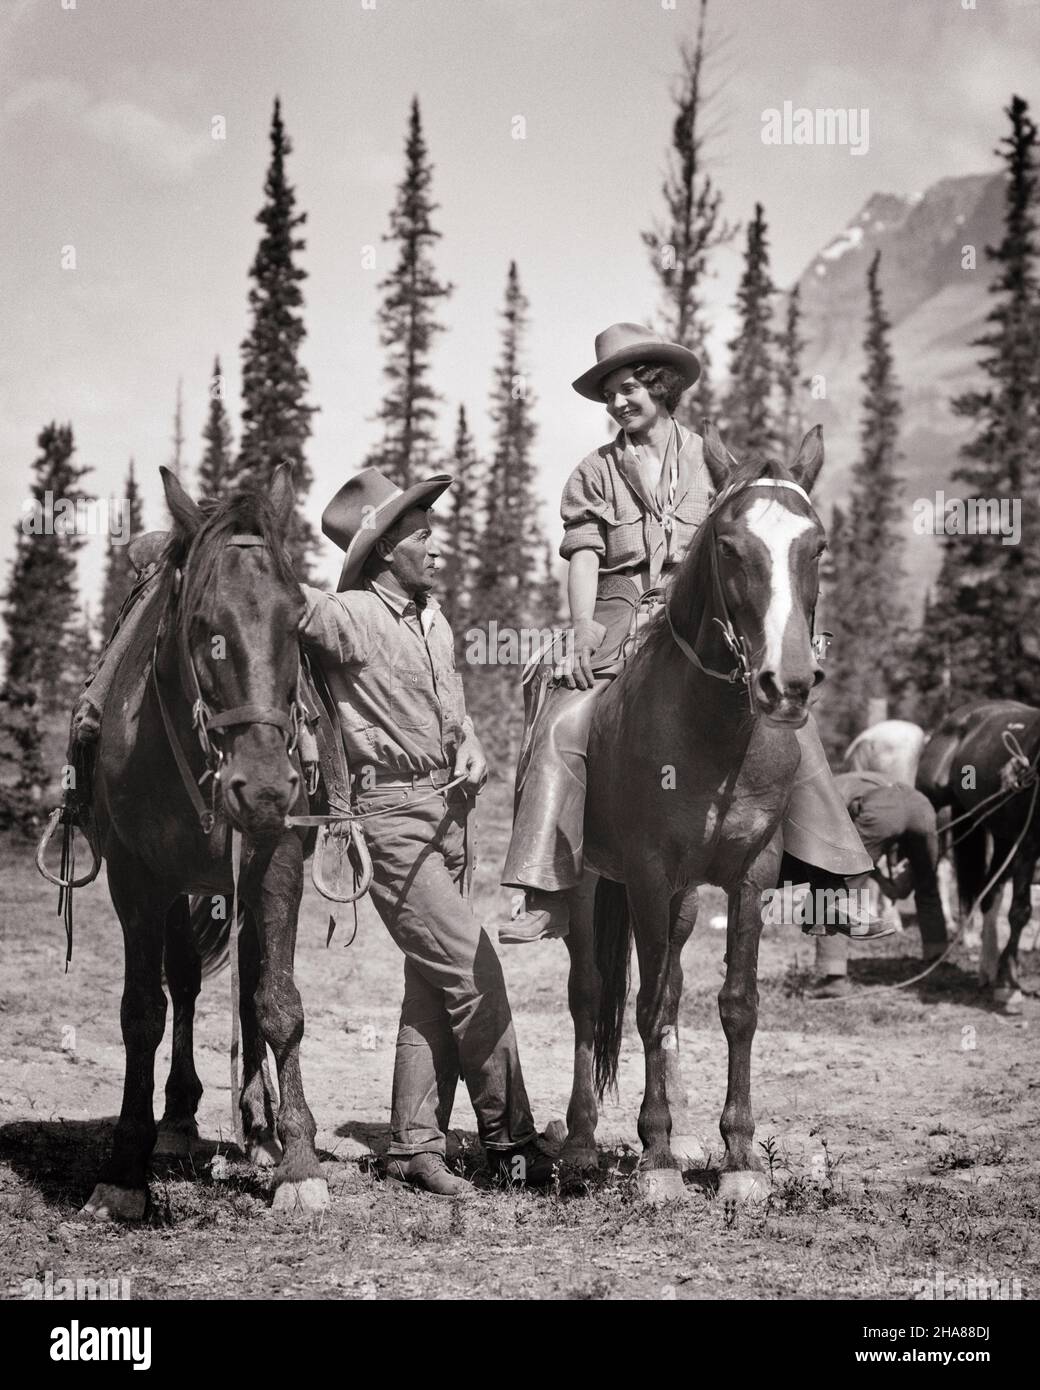 1920s 1930s OLDER MAN RANCH HAND COWBOY STANDING BY HORSE TALKING TO MOUNTED YOUNG WOMAN COWGIRL RIDING AT WESTERN DUDE RANCH - h4008 HAR001 HARS BEAUTY OLD TIME NOSTALGIA OLD FASHION 1 COMMUNICATION YOUNG ADULT HORSES BALANCE MONTANA TEAMWORK VACATION PLEASED JOY LIFESTYLE CELEBRATION FEMALES JOBS RURAL UNITED STATES COPY SPACE FULL-LENGTH LADIES PERSONS INSPIRATION SADDLE UNITED STATES OF AMERICA MALES WESTERN CONFIDENCE MIDDLE-AGED B&W NORTH AMERICA MIDDLE-AGED MAN NORTH AMERICAN TIME OFF SKILL OCCUPATION SKILLS MAMMALS CHEERFUL ADVENTURE LEISURE CUSTOMER SERVICE TRIP GETAWAY KNOWLEDGE Stock Photo